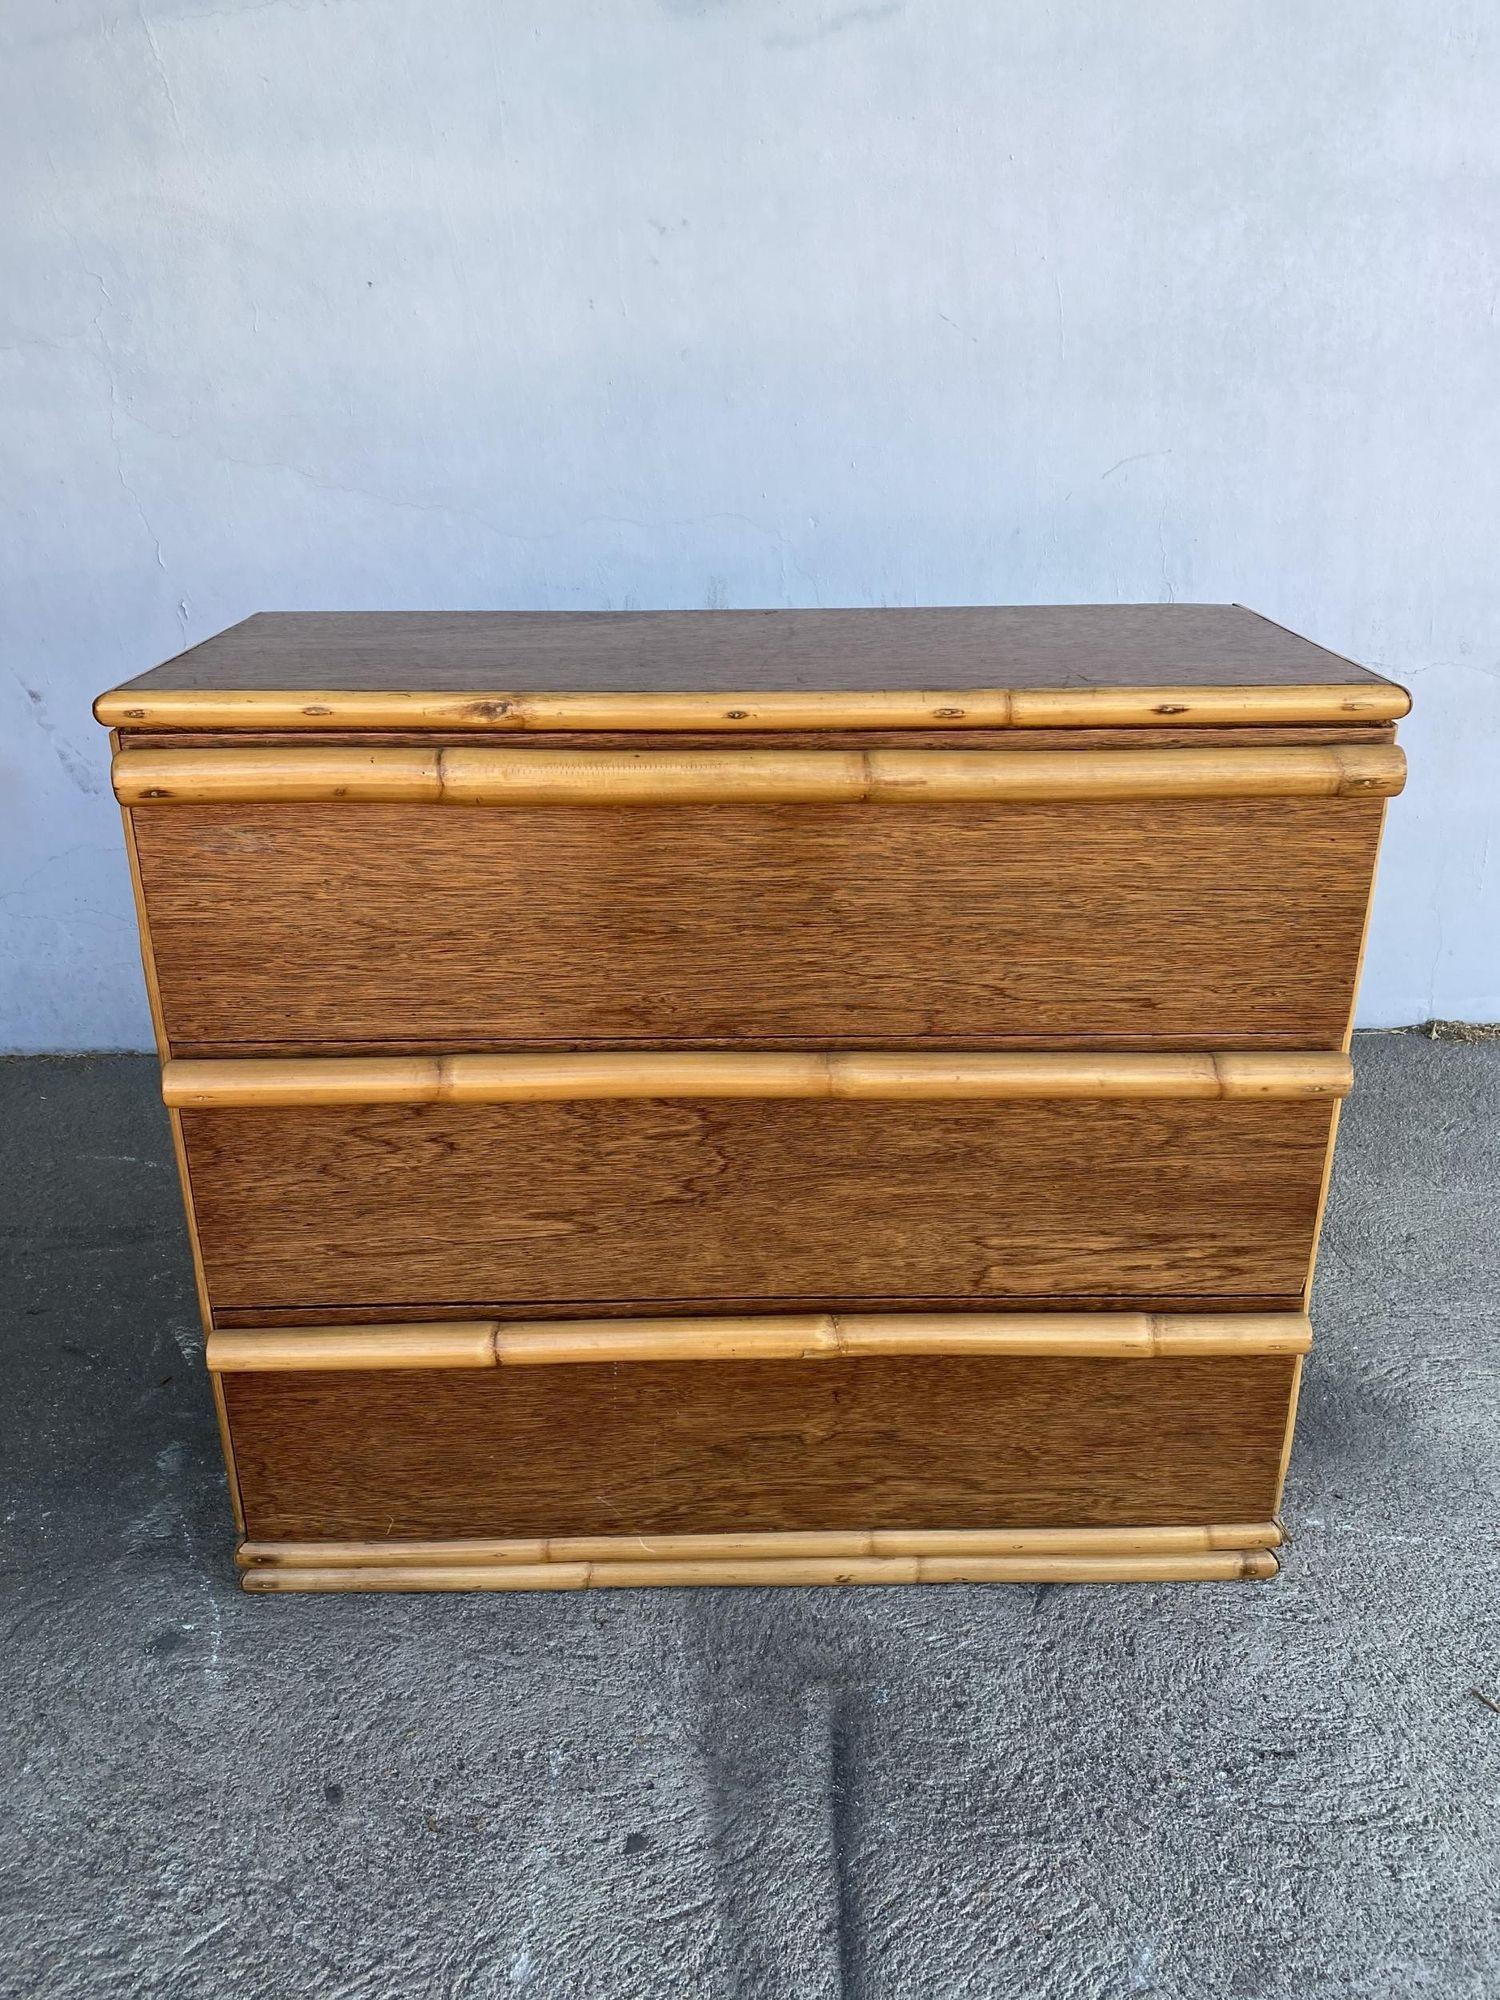 Restored Modernist Mahogany Chest of Drawers W/ Rattan Pulls In Excellent Condition For Sale In Van Nuys, CA